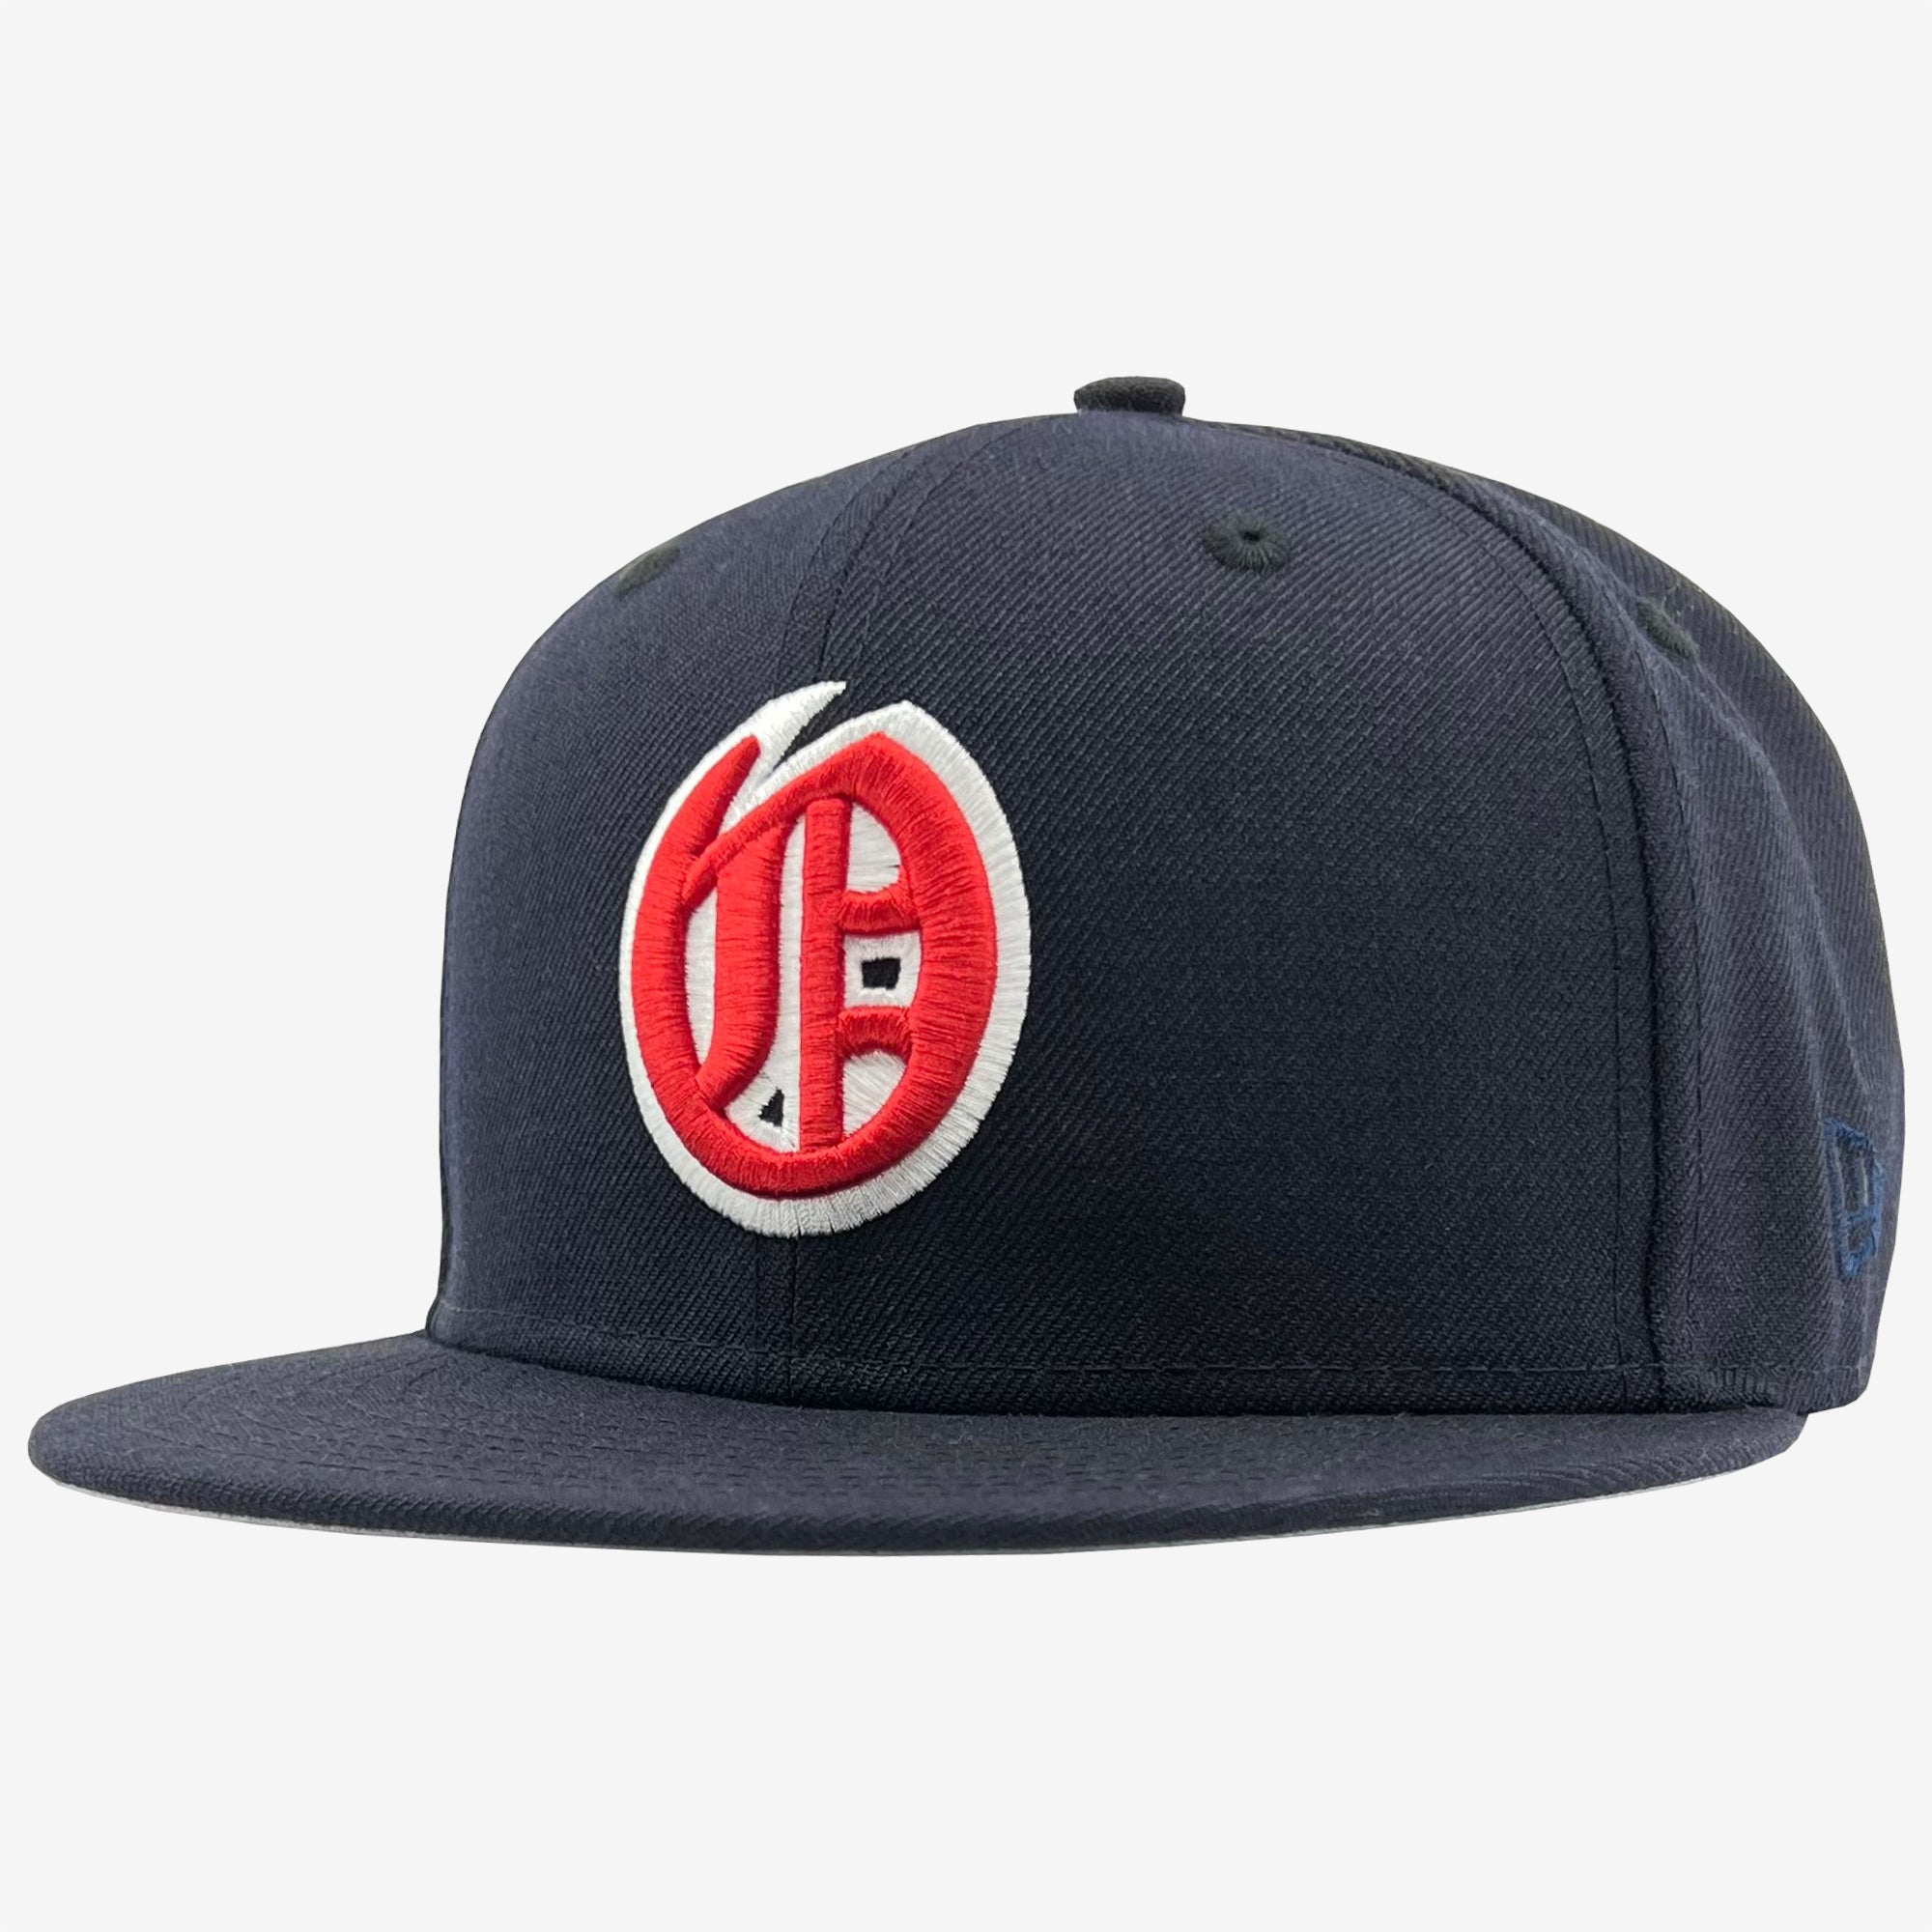 Side view of navy fitted cap with red embroidered Oakland Oaks logo on the crown.